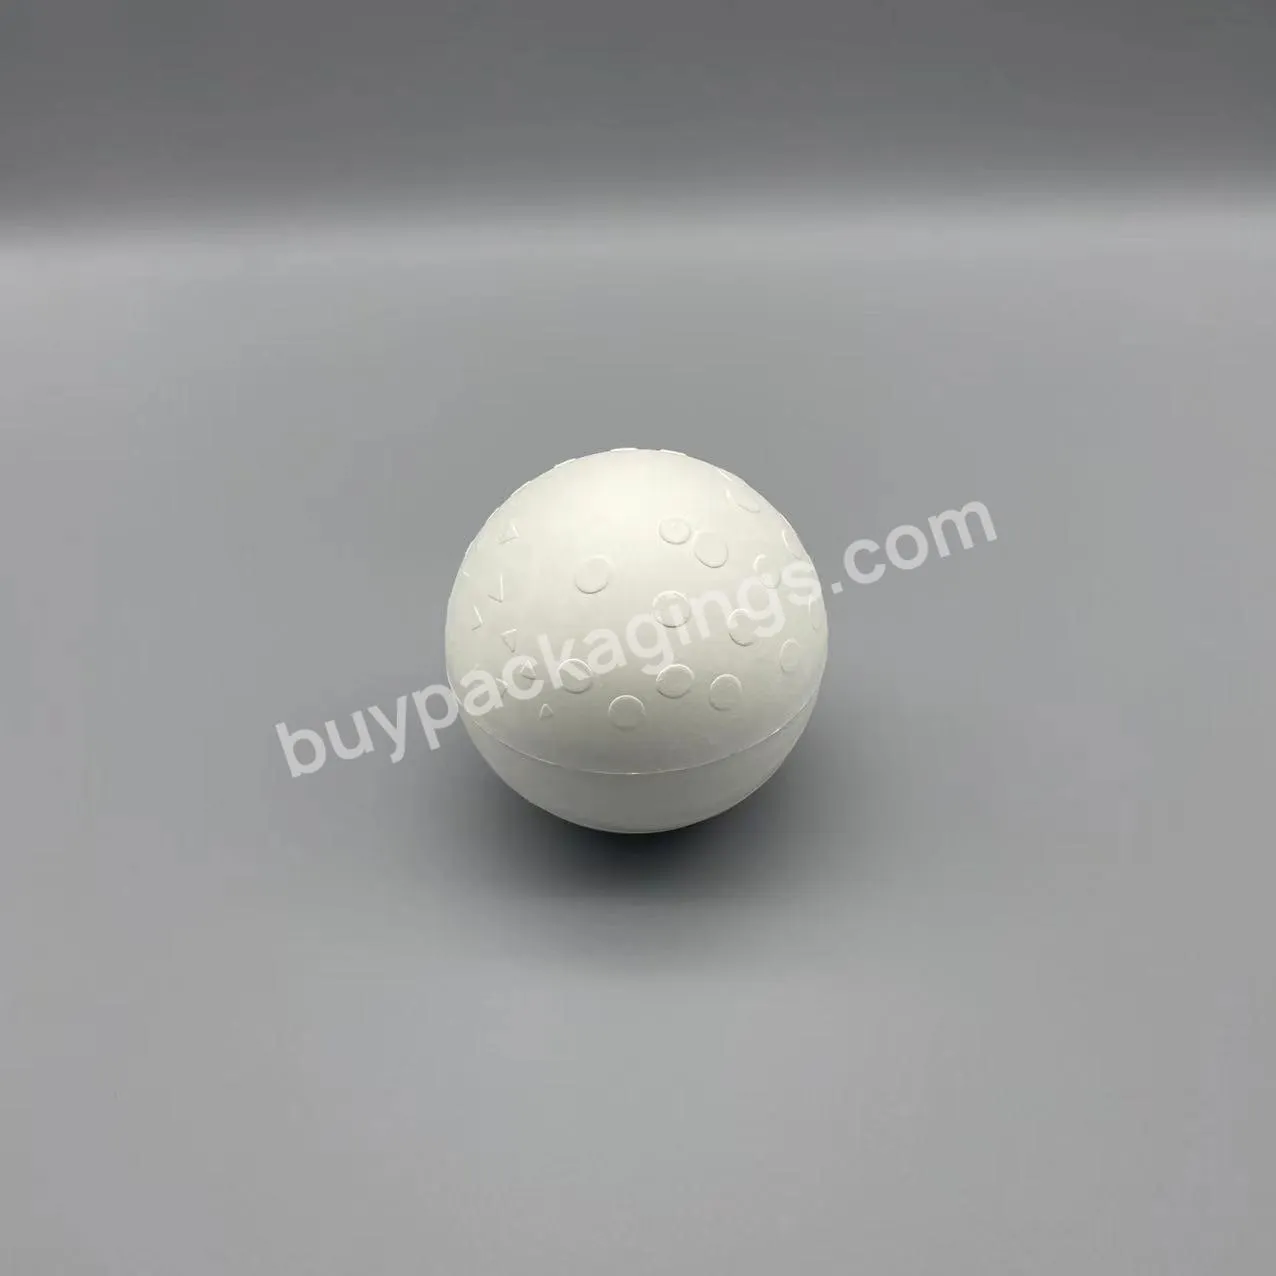 Wholesale Custom Biodegradable Product Packaging Recycled Molded Paper Ball Shape Boxes For Christmas Spheres - Buy Boxes For Christmas Spheres,Paper Ball Shape Box,Wholesale Custom Product Packaging Recycled.